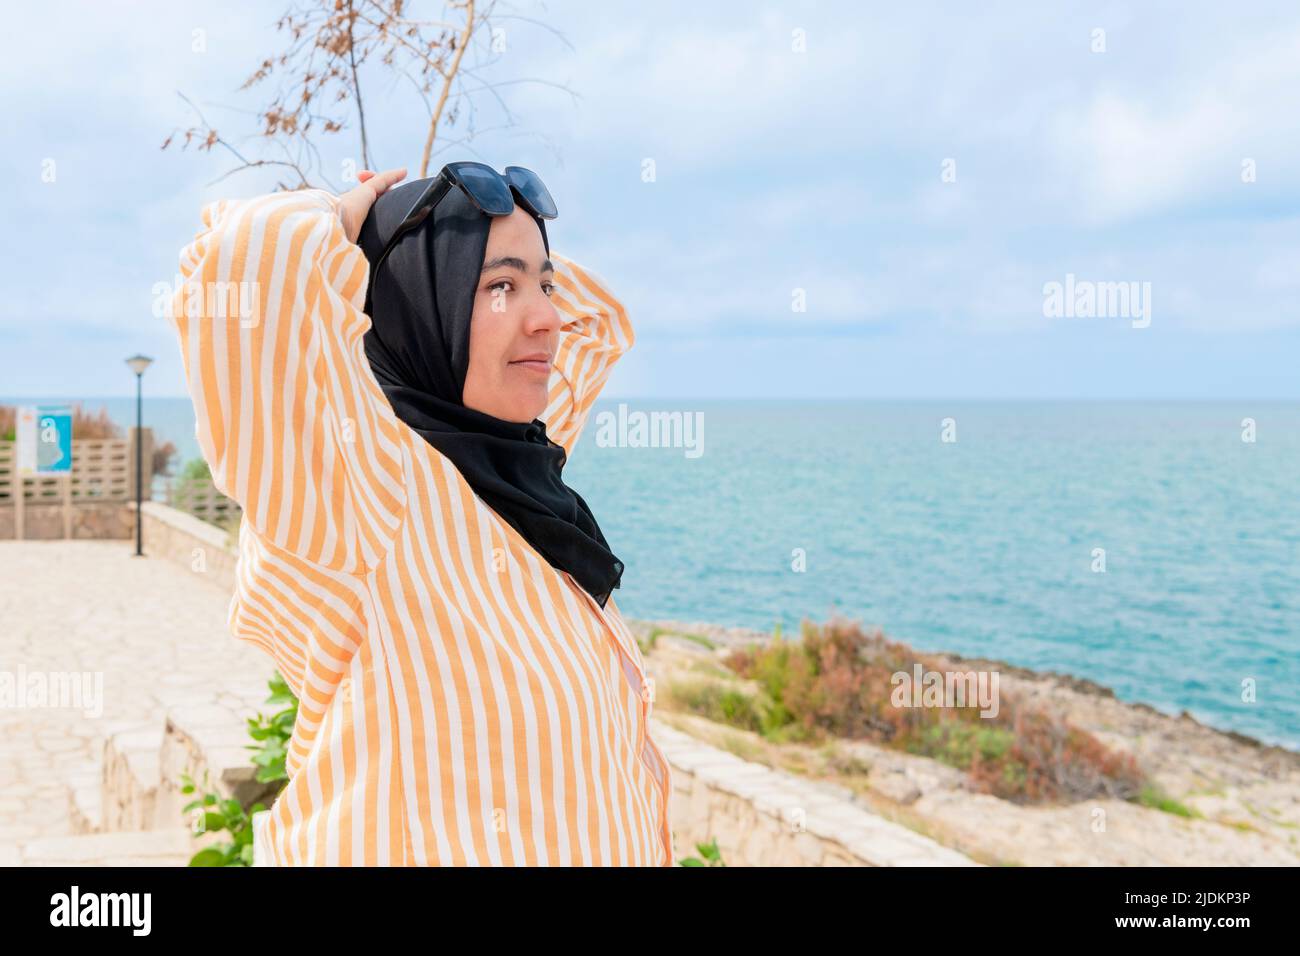 Maghrebi woman with hijab and glasses relaxing near the sea Stock Photo